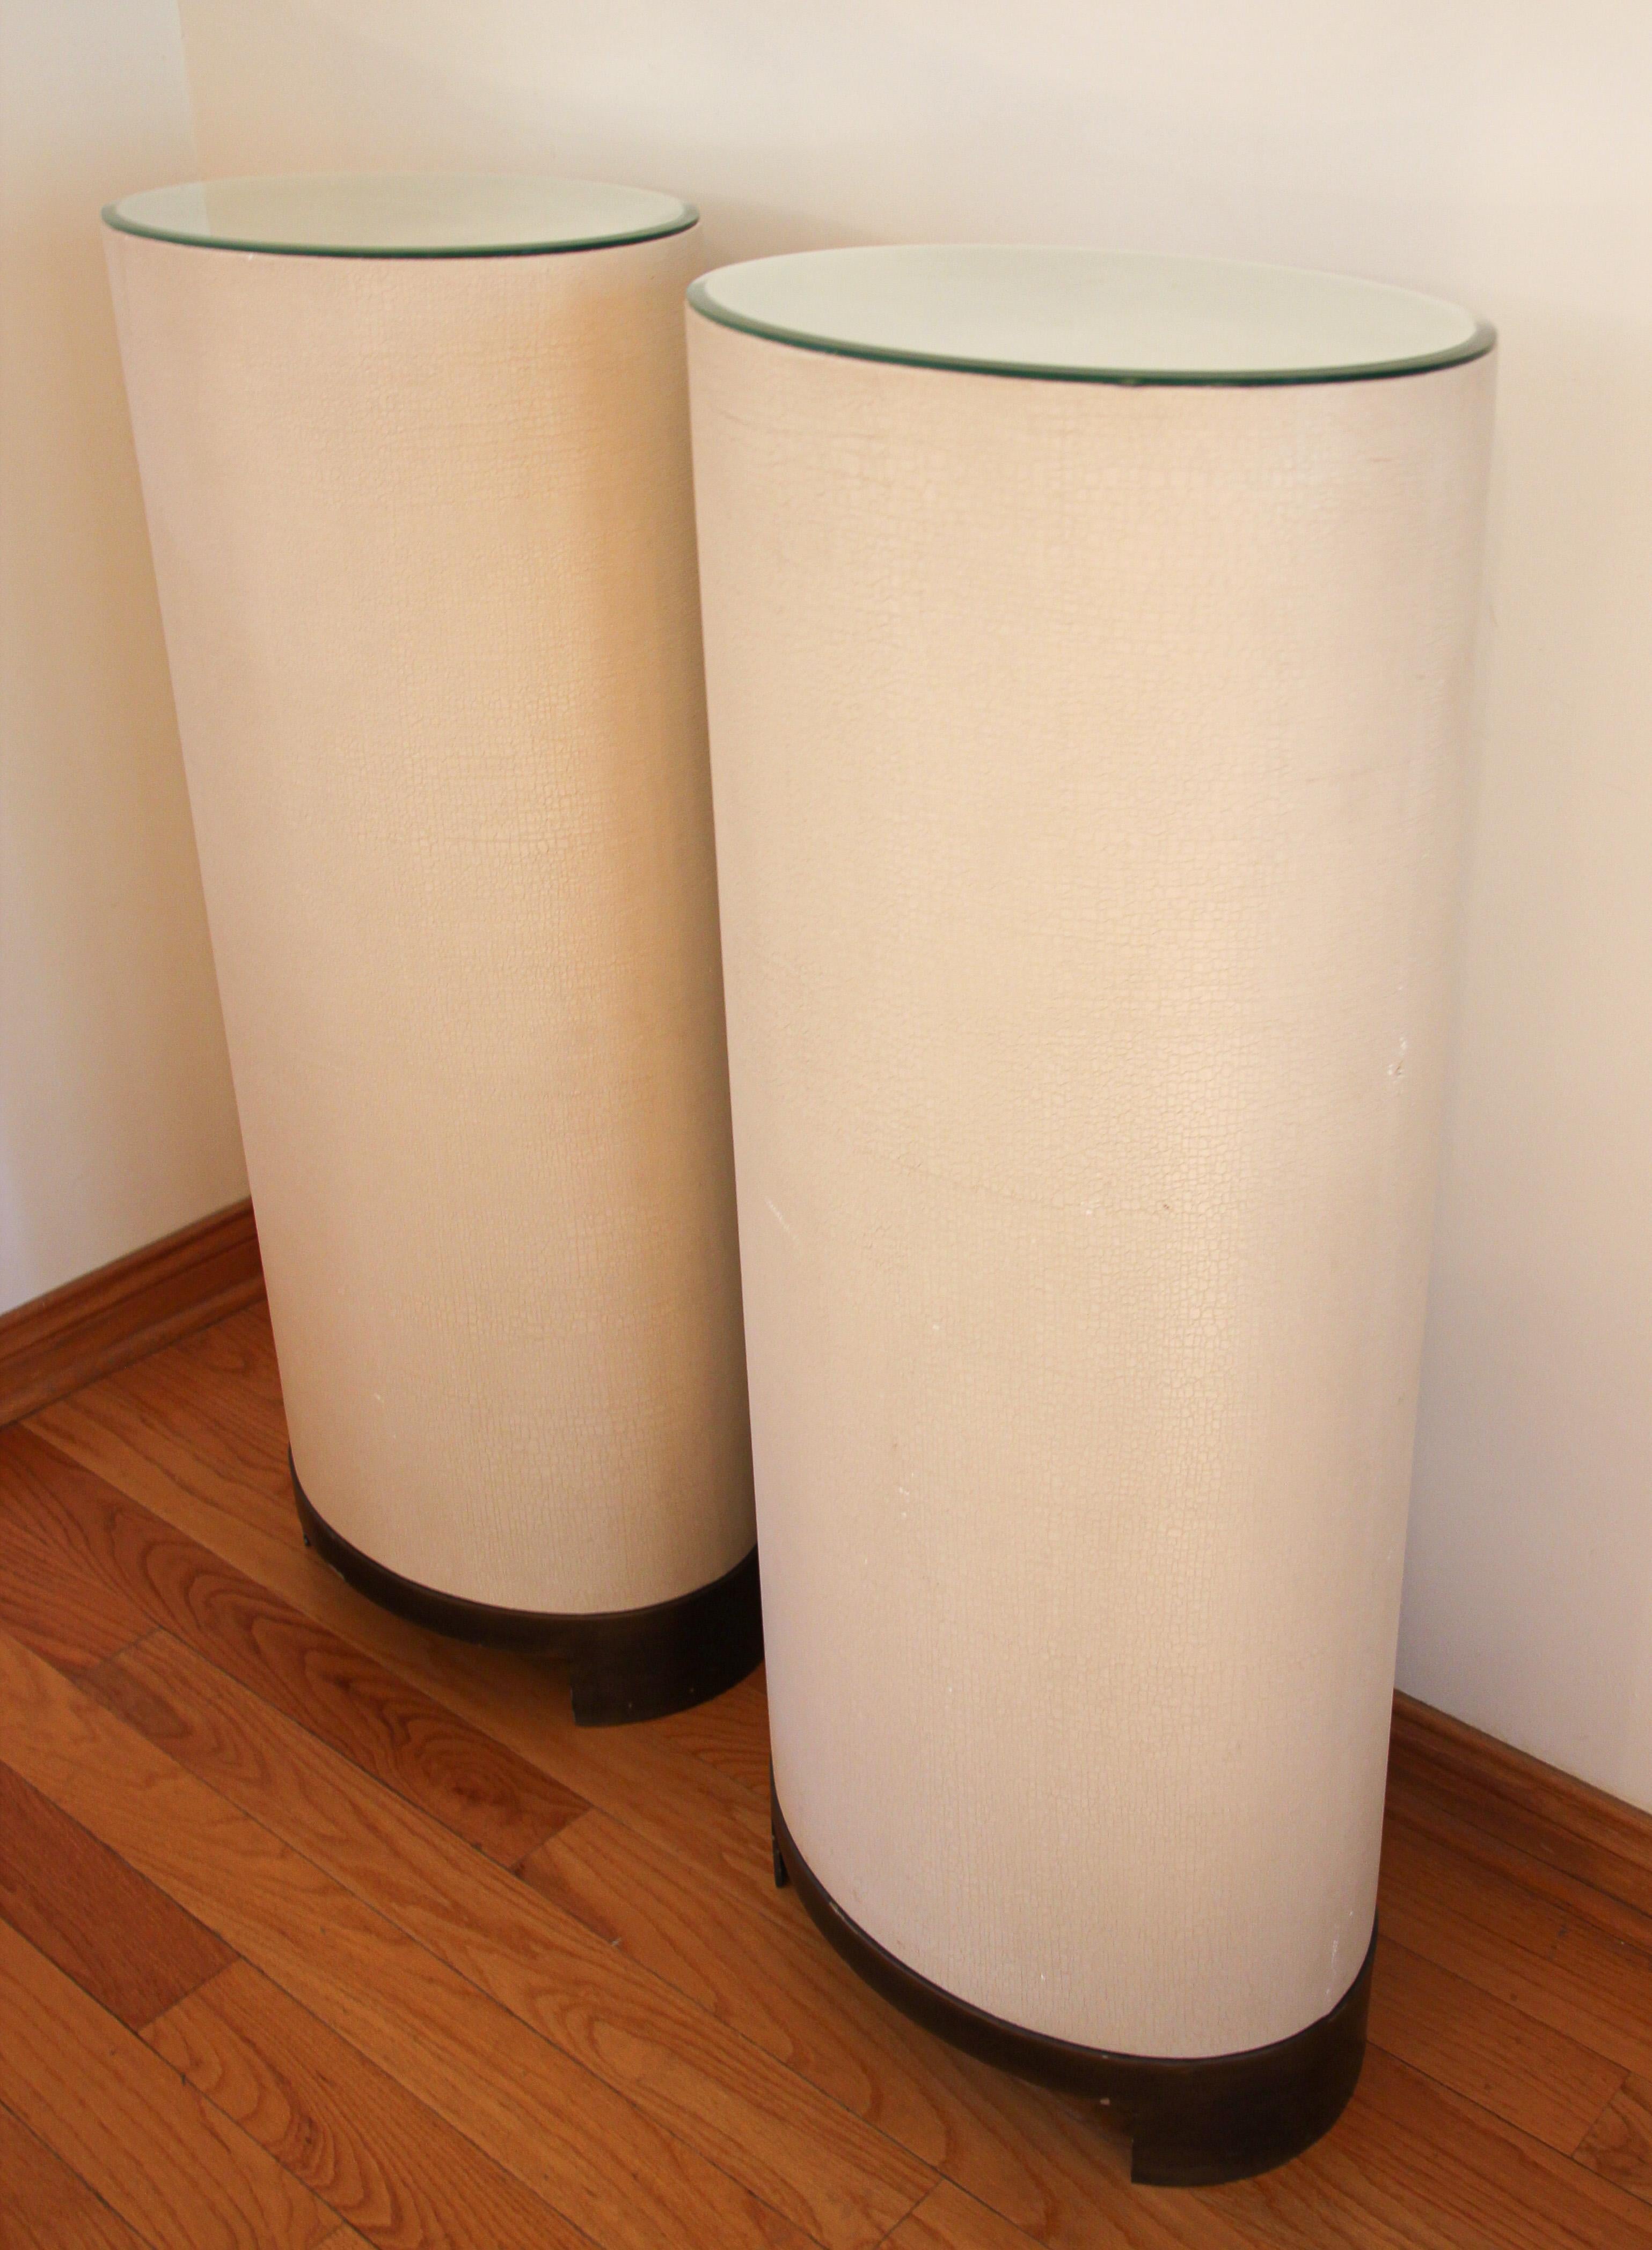 Vintage pair of ellipse pedestals by Global Views.
Global Views ellipse Antique brass stand.
The ellipse oval pedestal stands out in any interior. 
Each piece is first hand-wrapped on all sides in Belgian linen over an acacia veneer. A complex